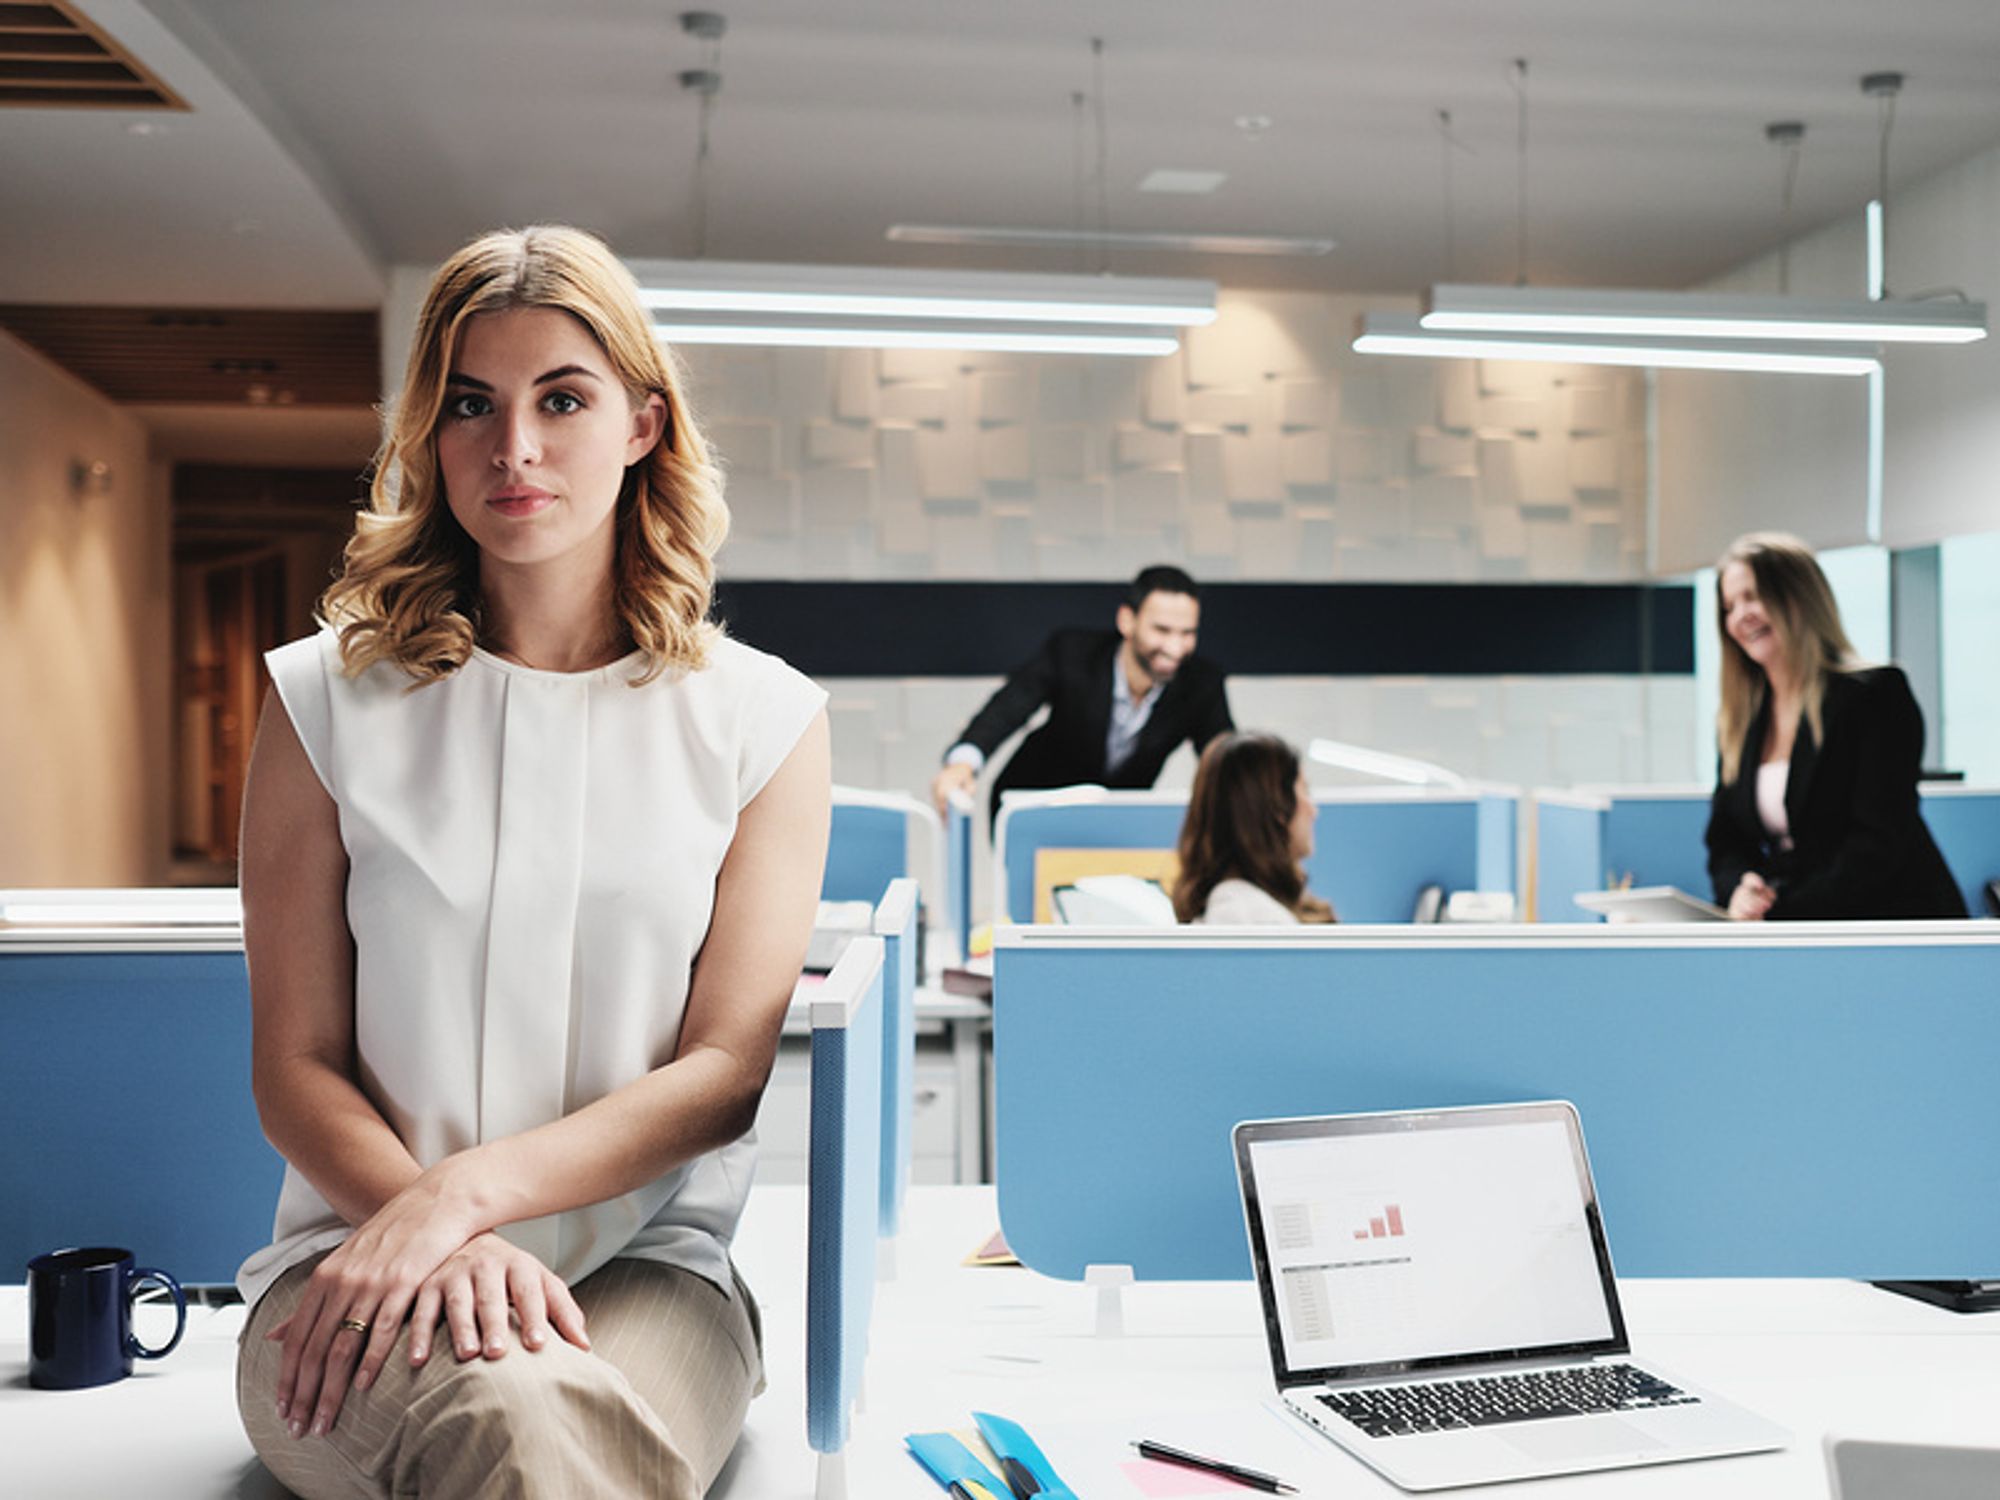 Young woman sitting alone at a cubical while her co-workers laugh and talk in the background.